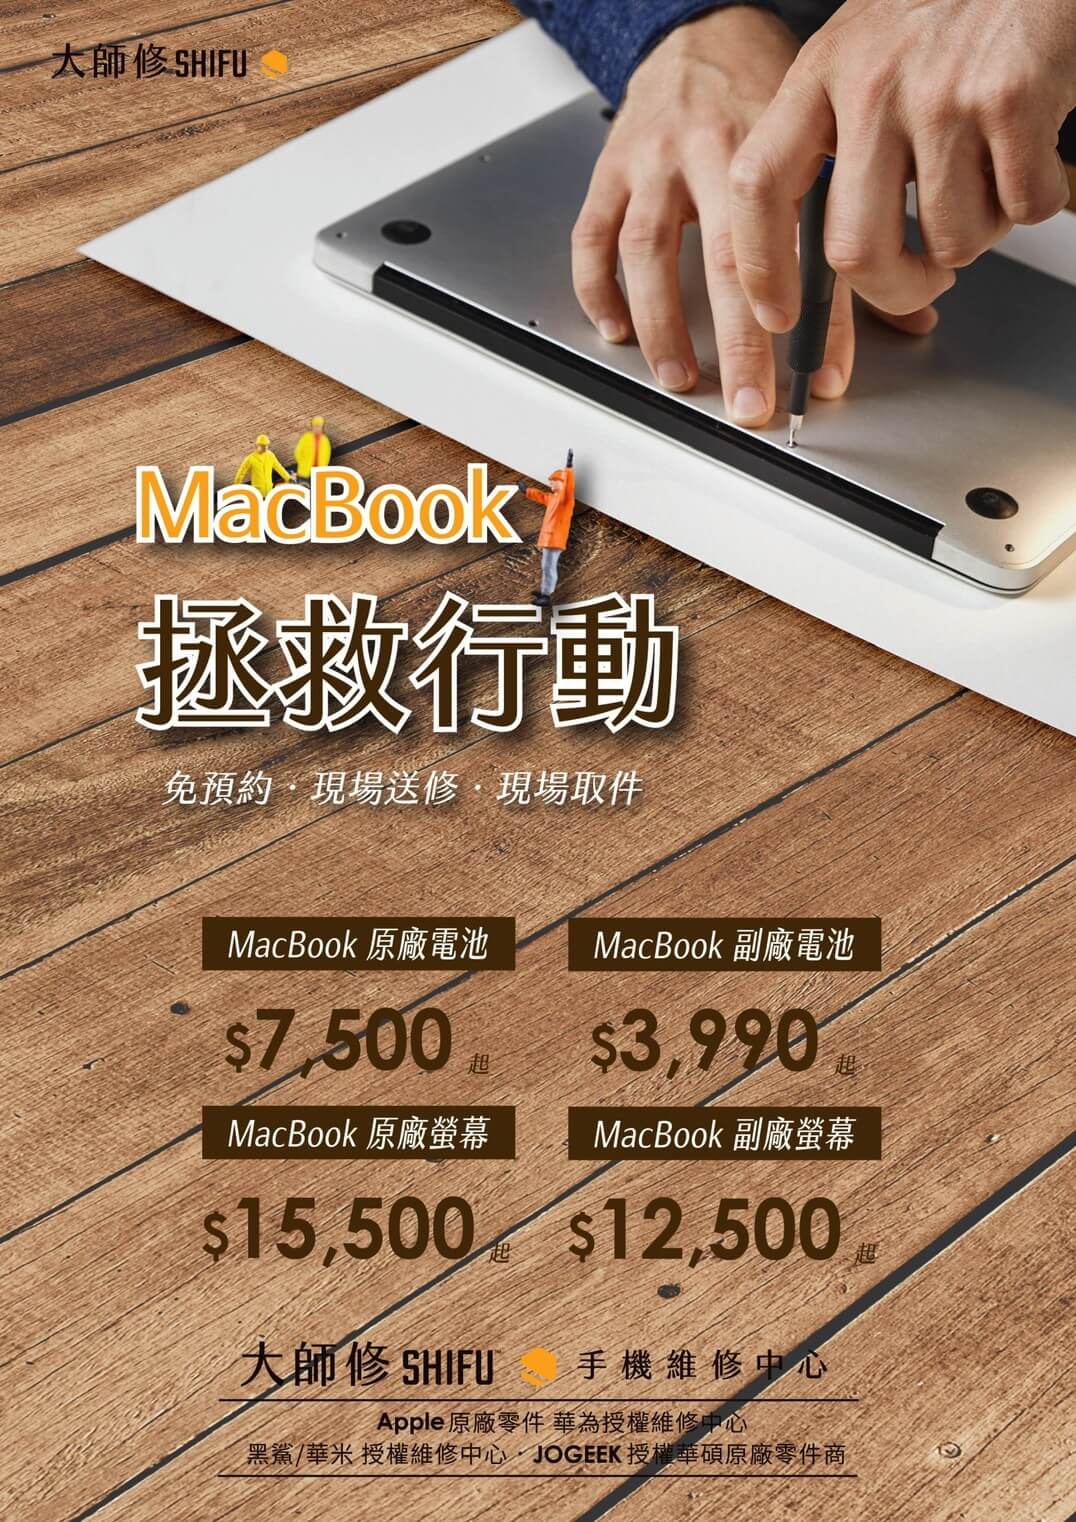 You are currently viewing MacBook搶救行動